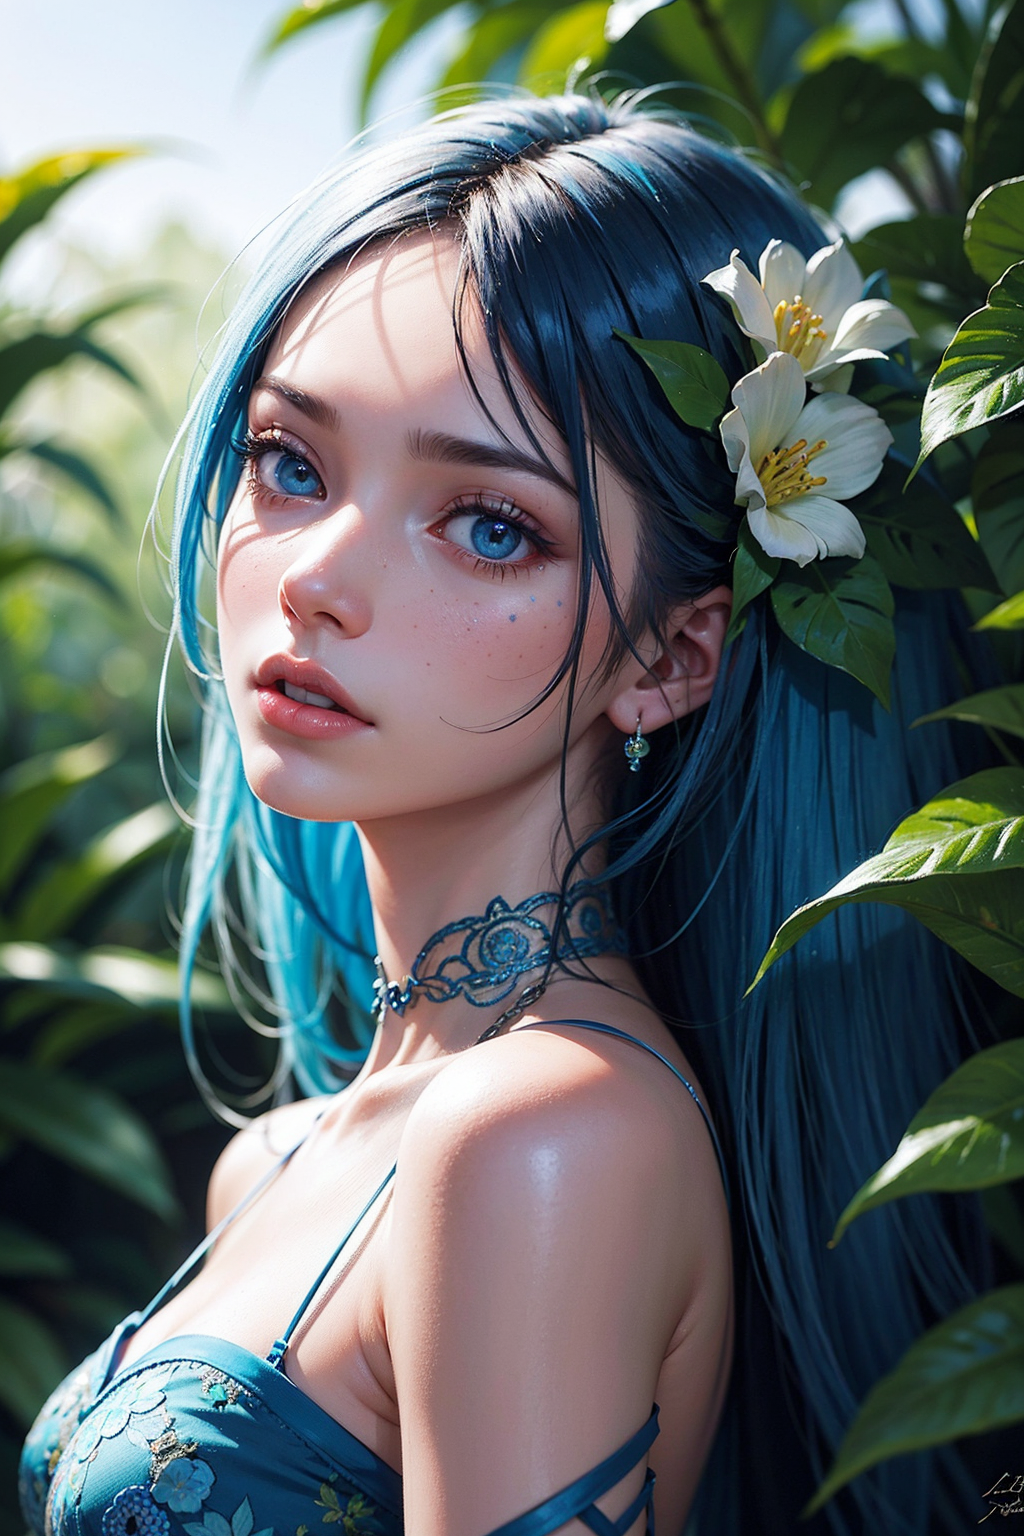 Blue-haired woman with a white flower in her hair.